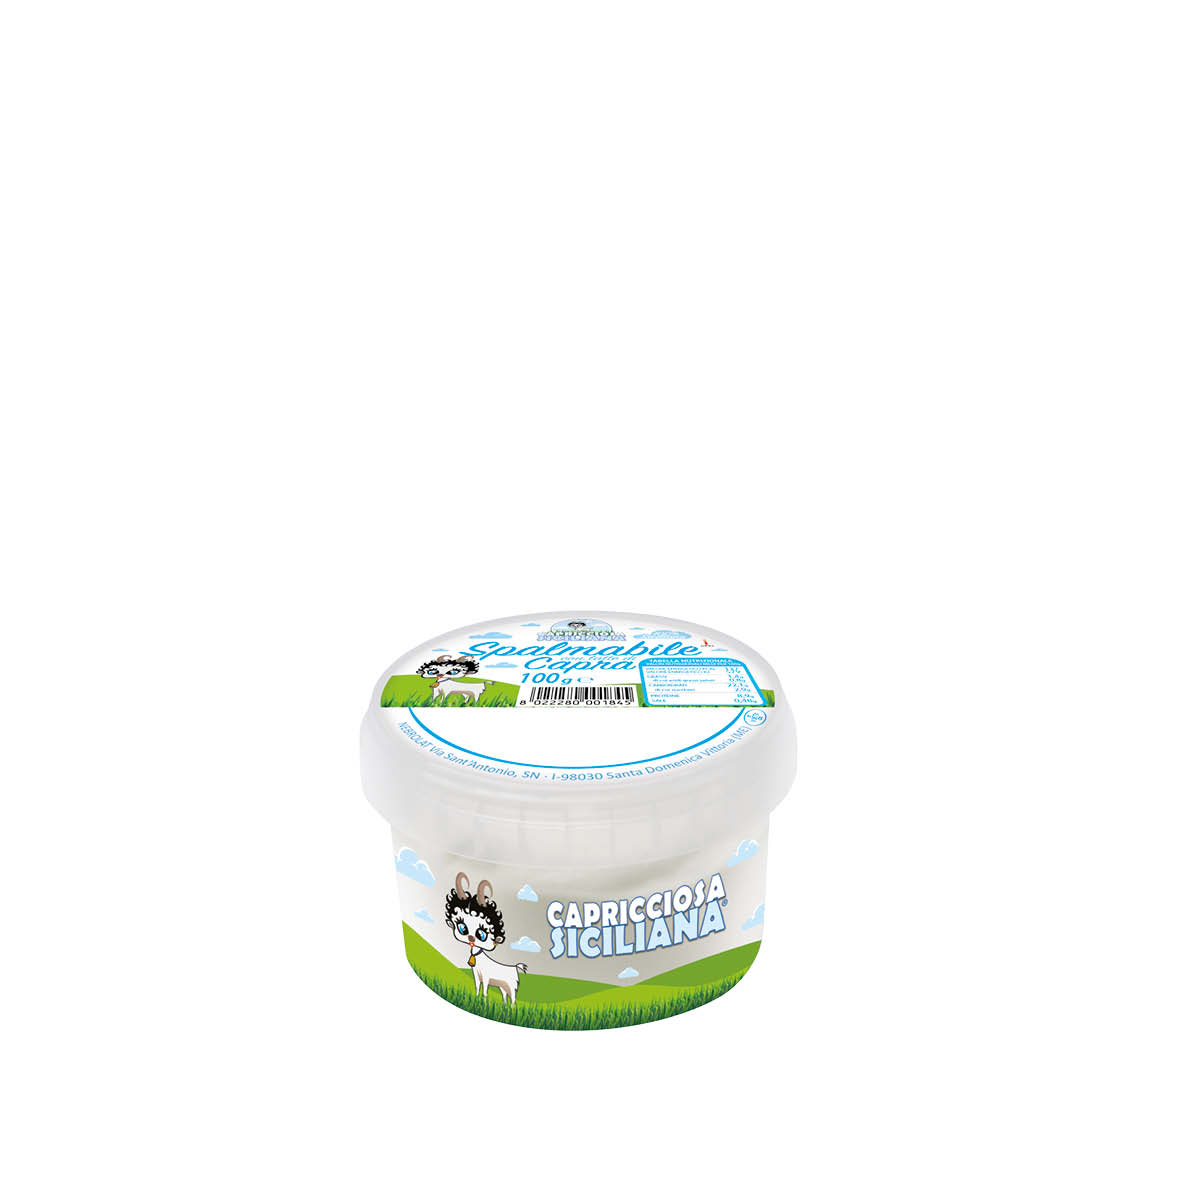 Goat cheese spread gr 100